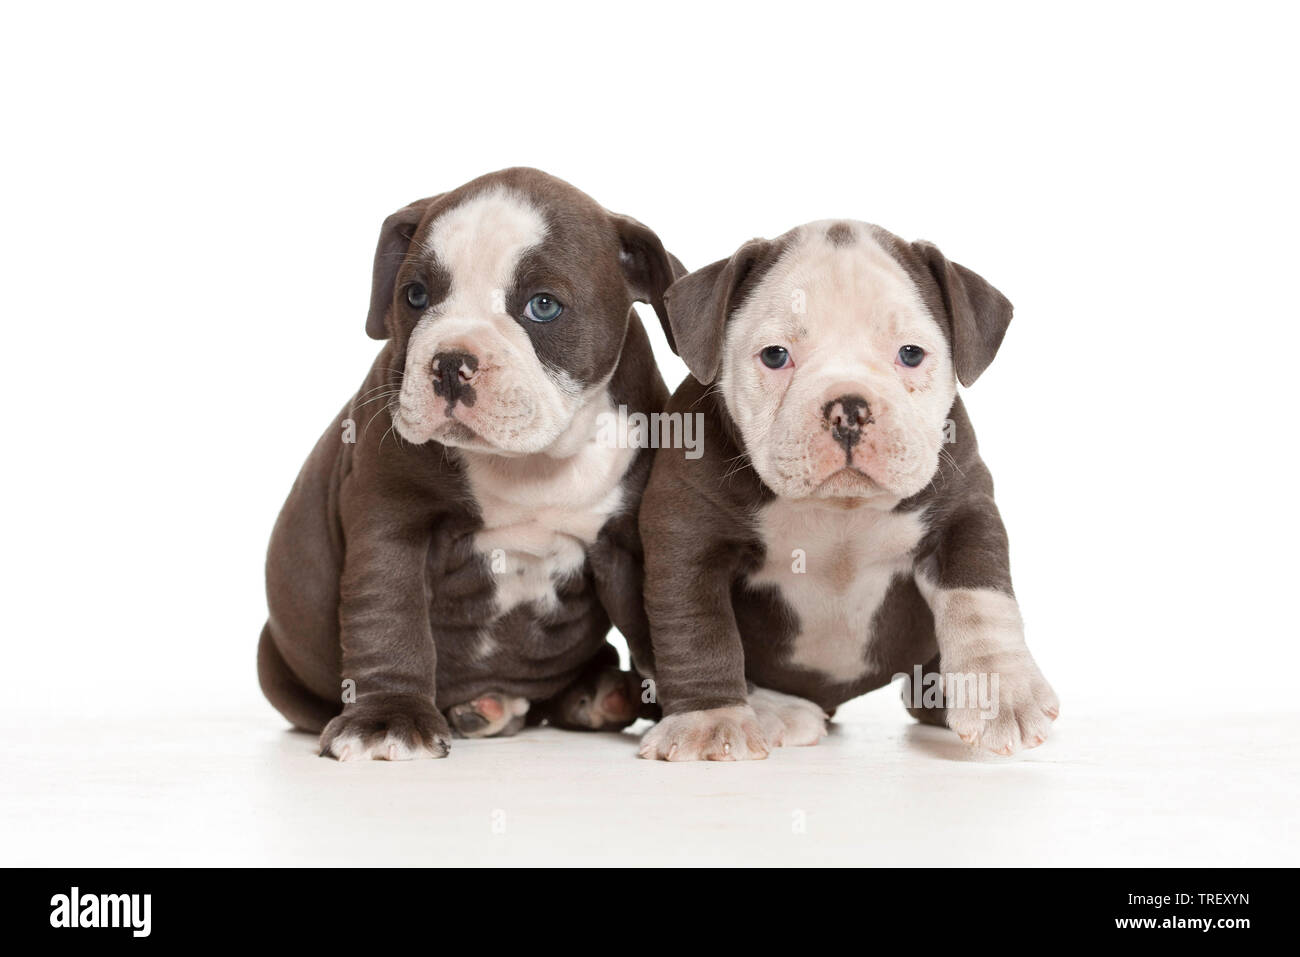 English Bulldog. Puppy running towards the camera. Studio picture against a white background. Germany Stock Photo